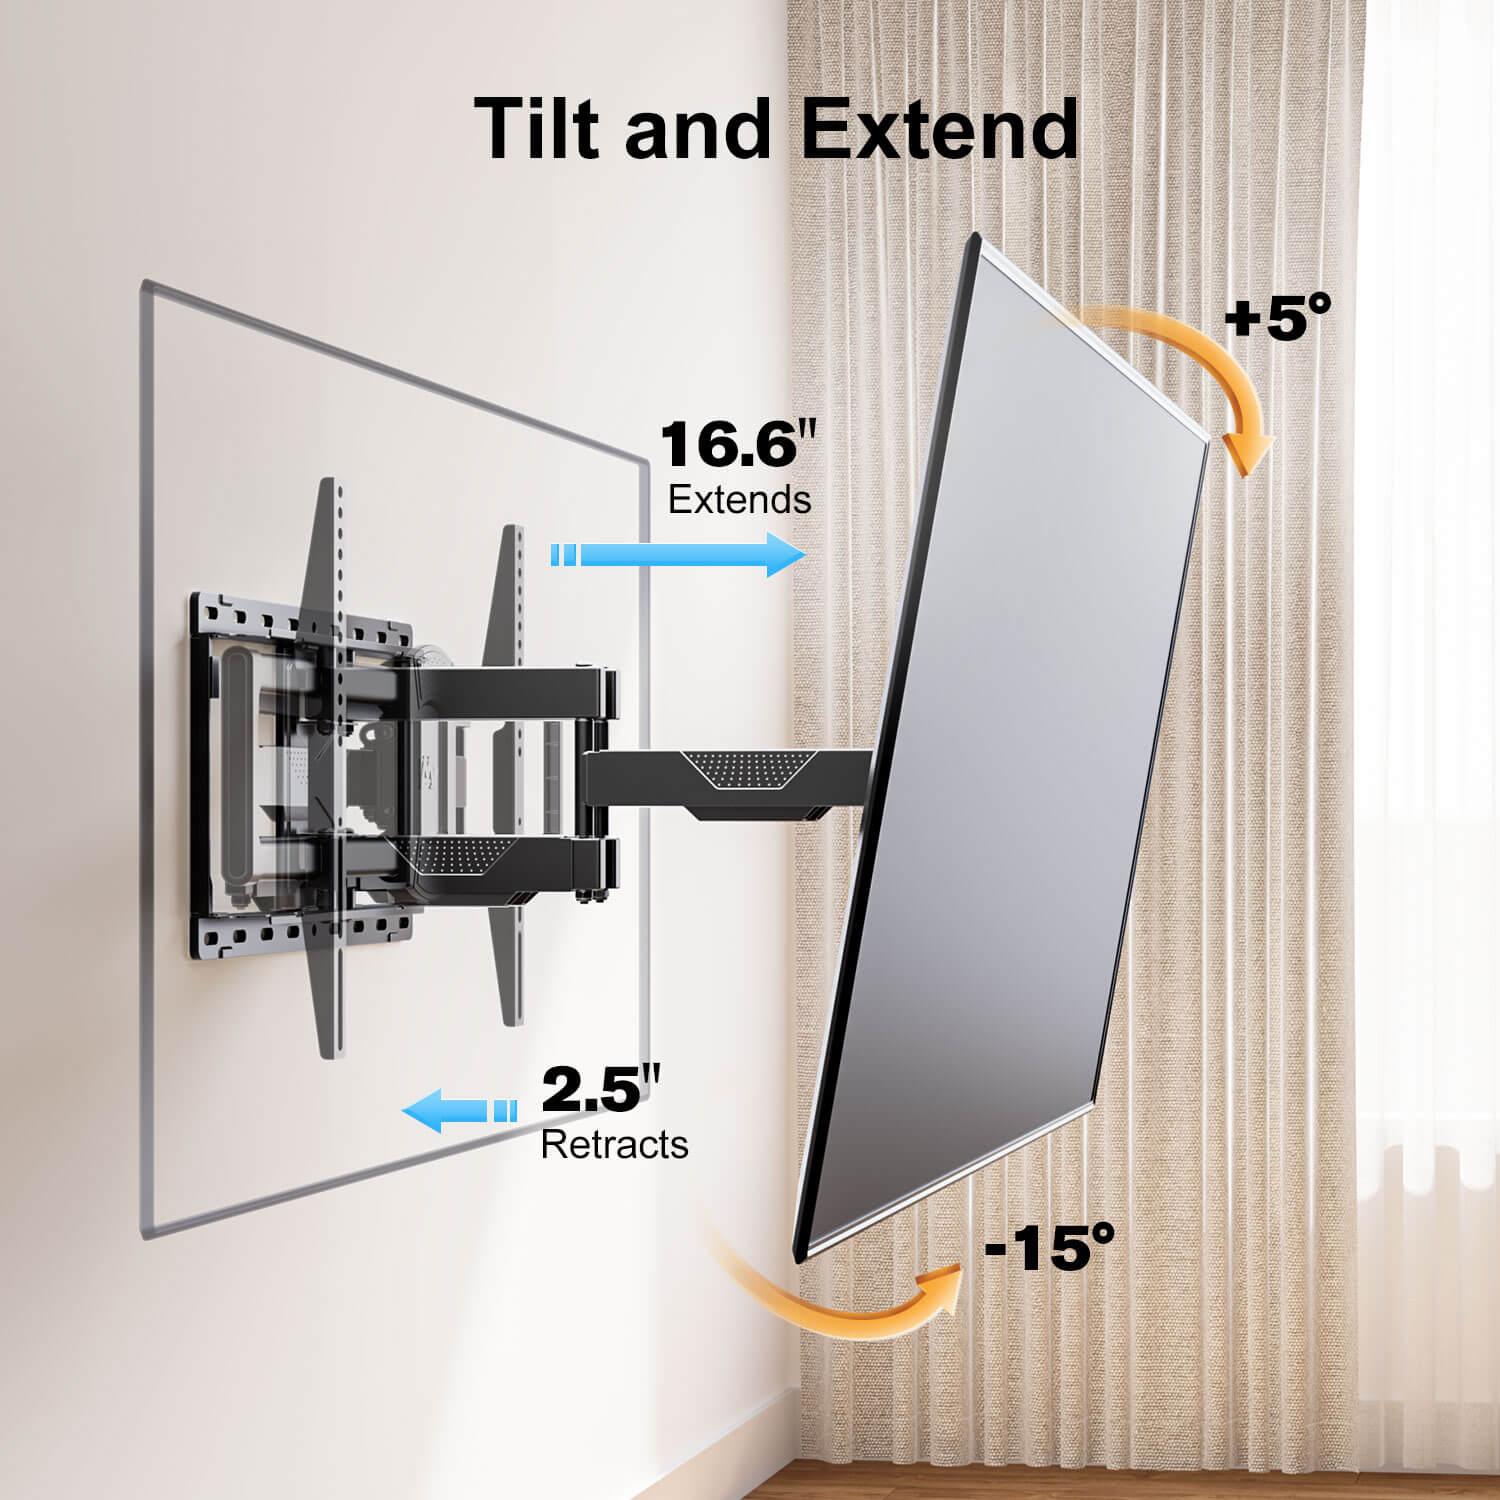 75 inch TV wall mounts with 16.6'' extension  tilts the TV up and down for anti-glaring